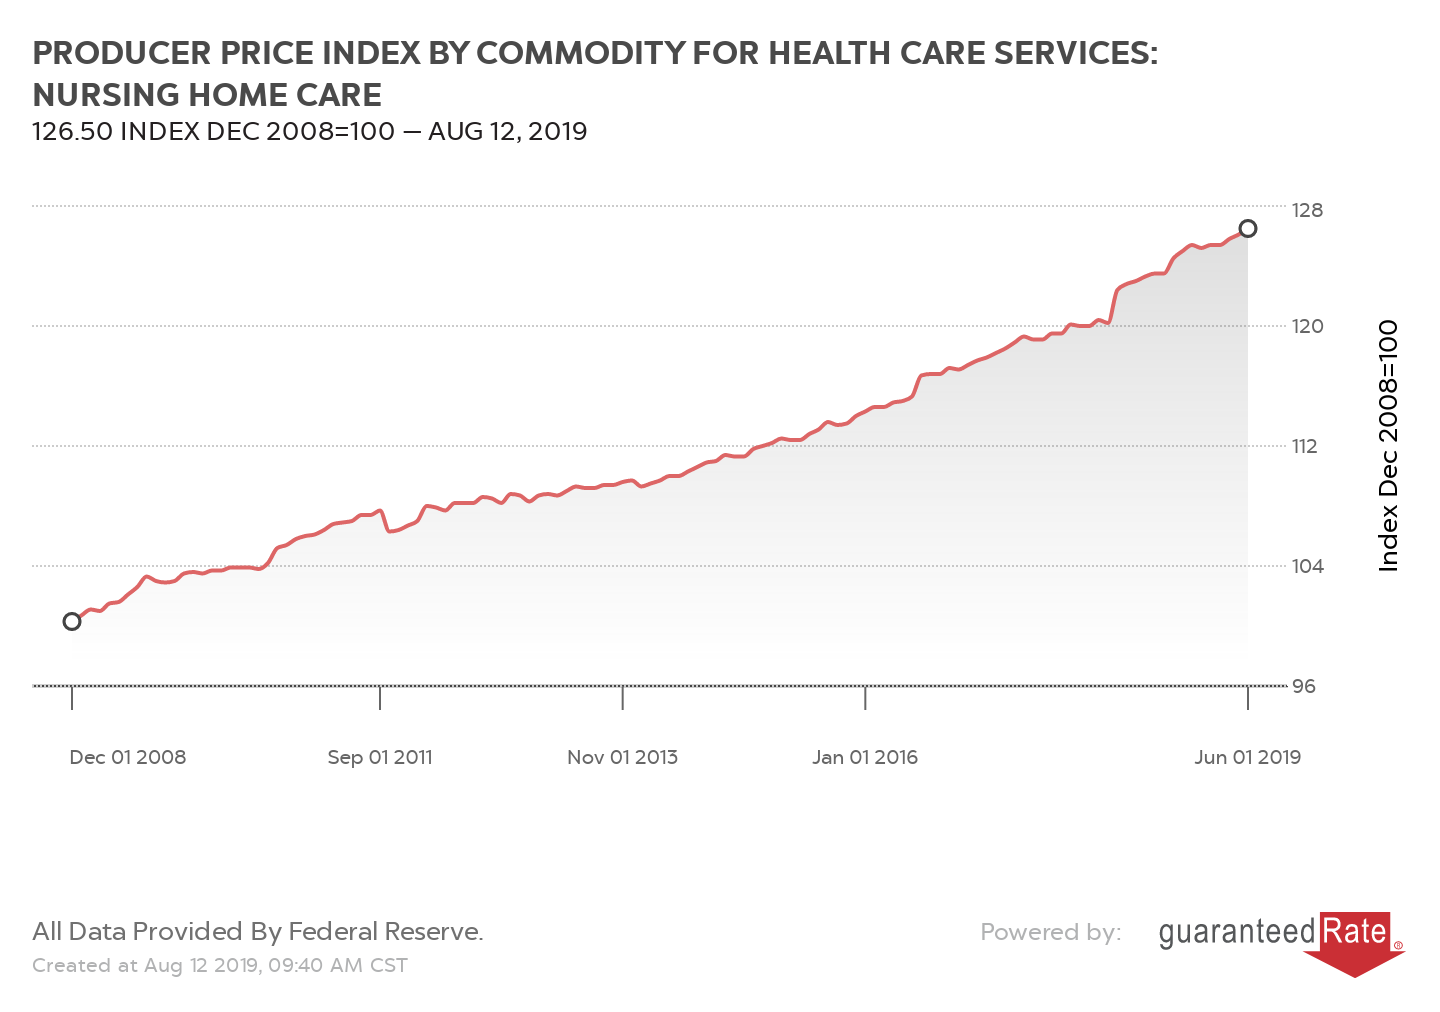 PRODUCER PRICE INDEX BY COMMODITY FOR HEALTH CARE SERVICES: NURSING HOME CARE